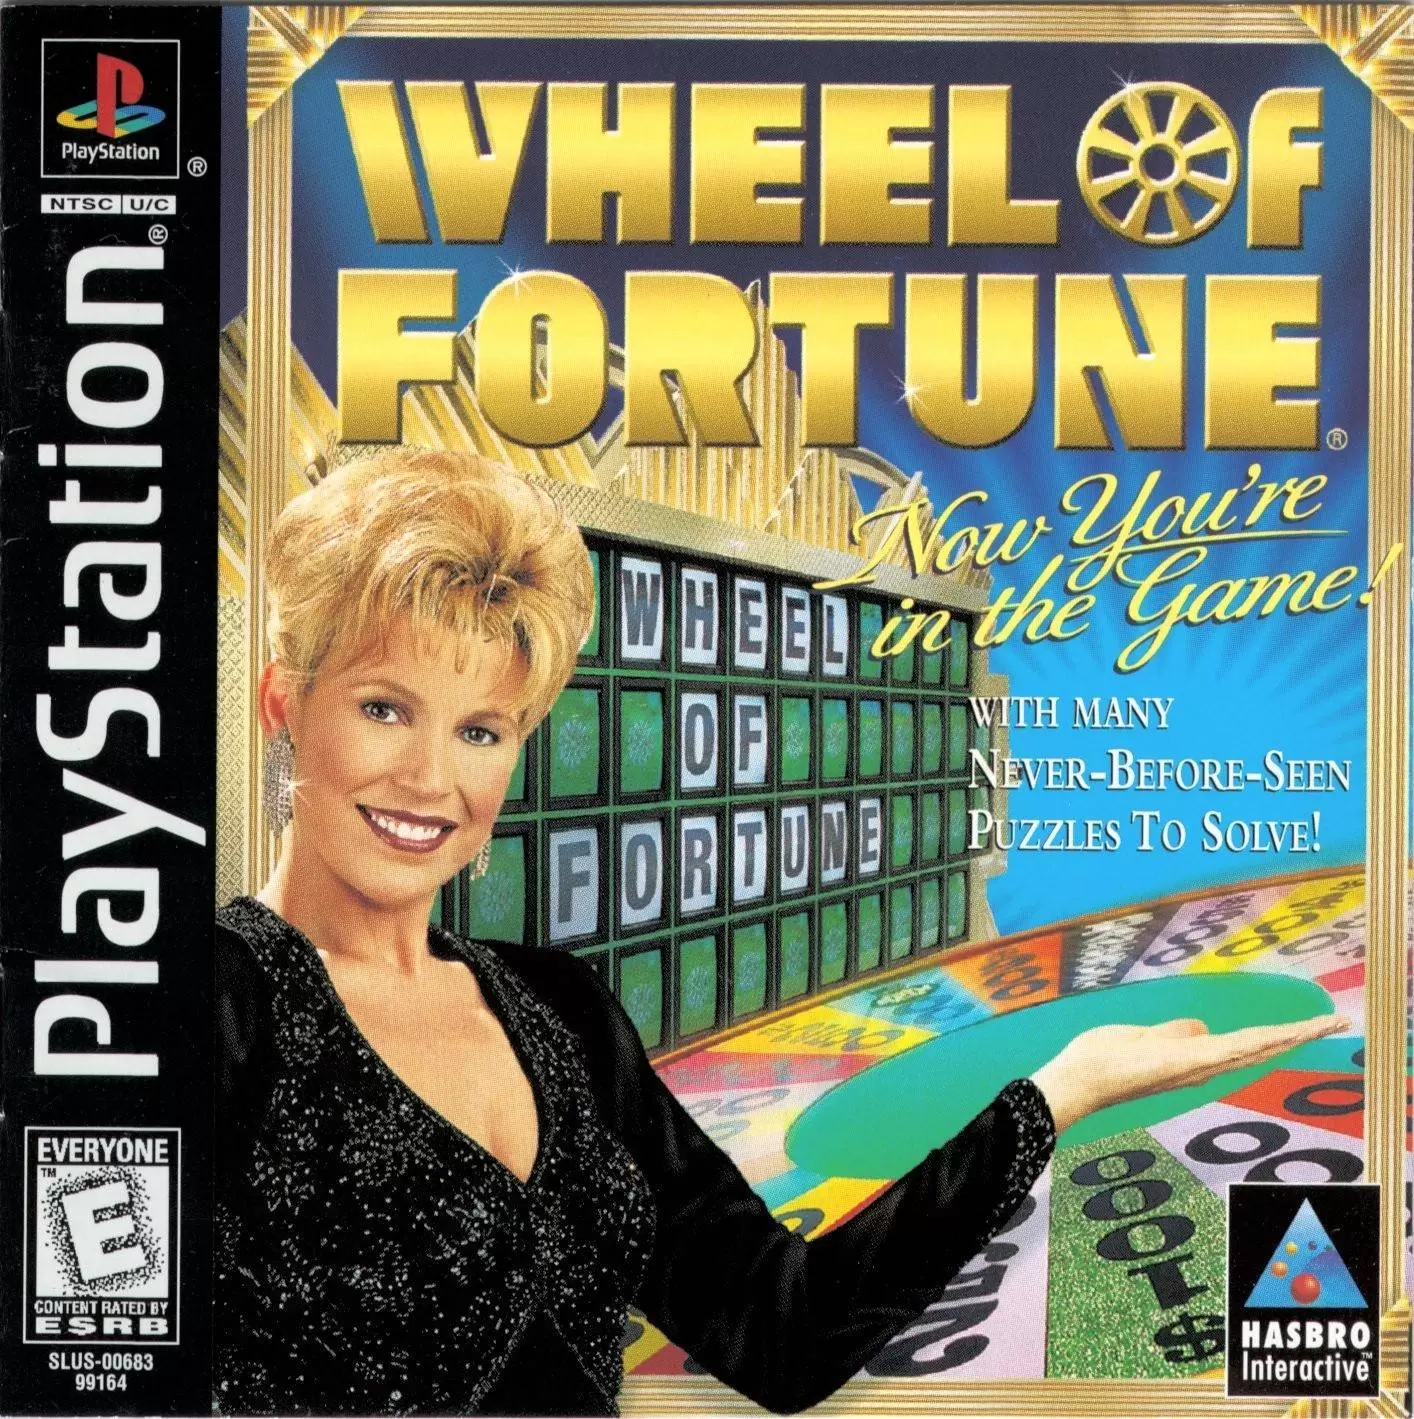 Playstation games - Wheel of Fortune